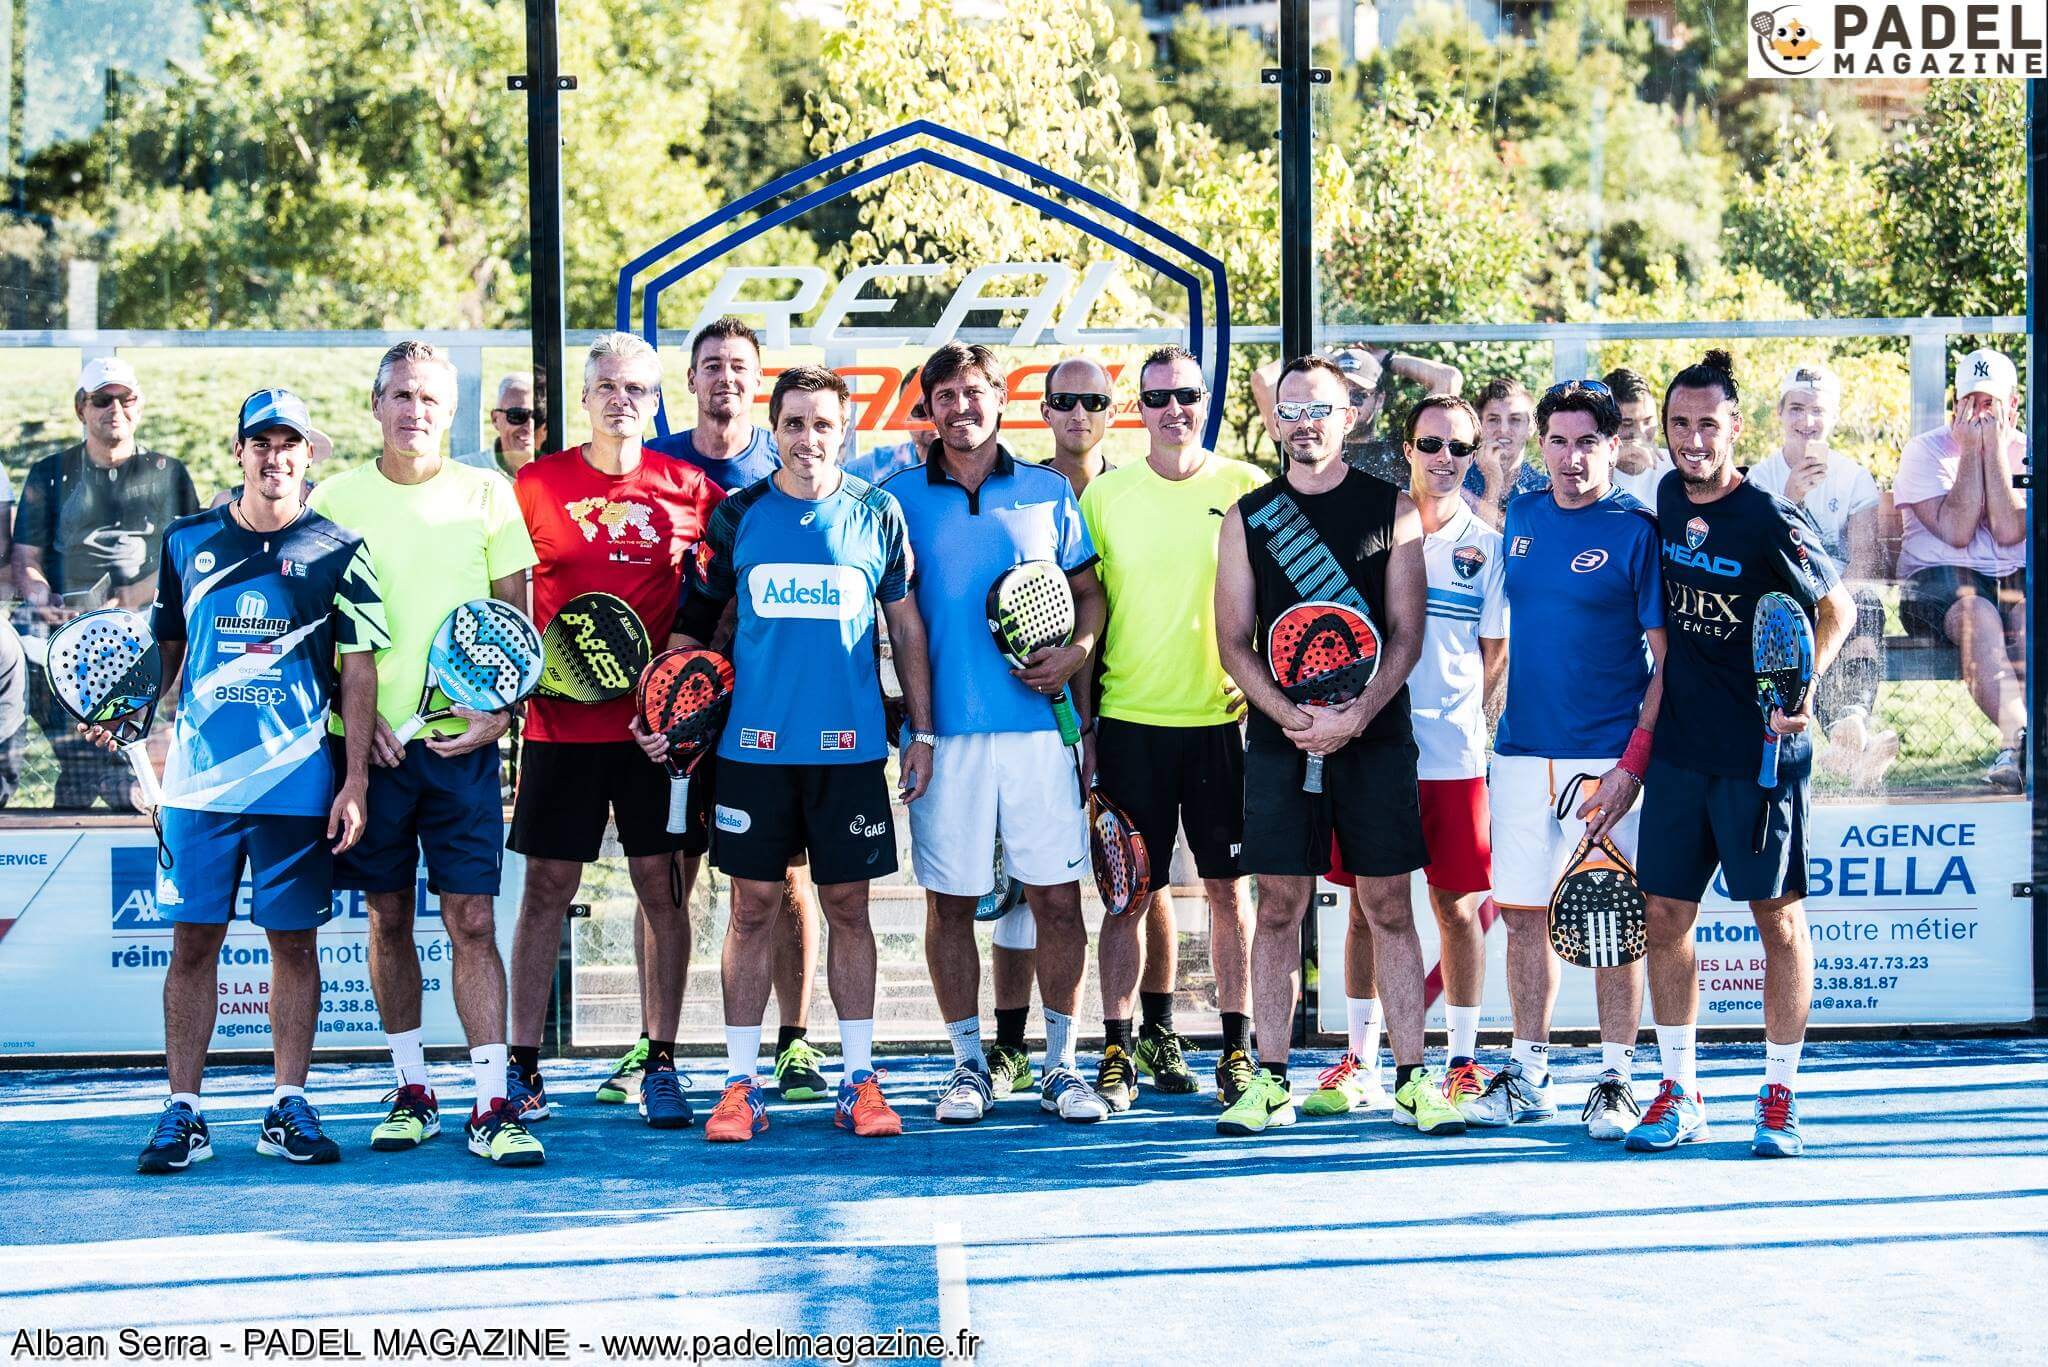 HEAD PADEL OPEN –Real Padel Club - Summary Days 1 and 2